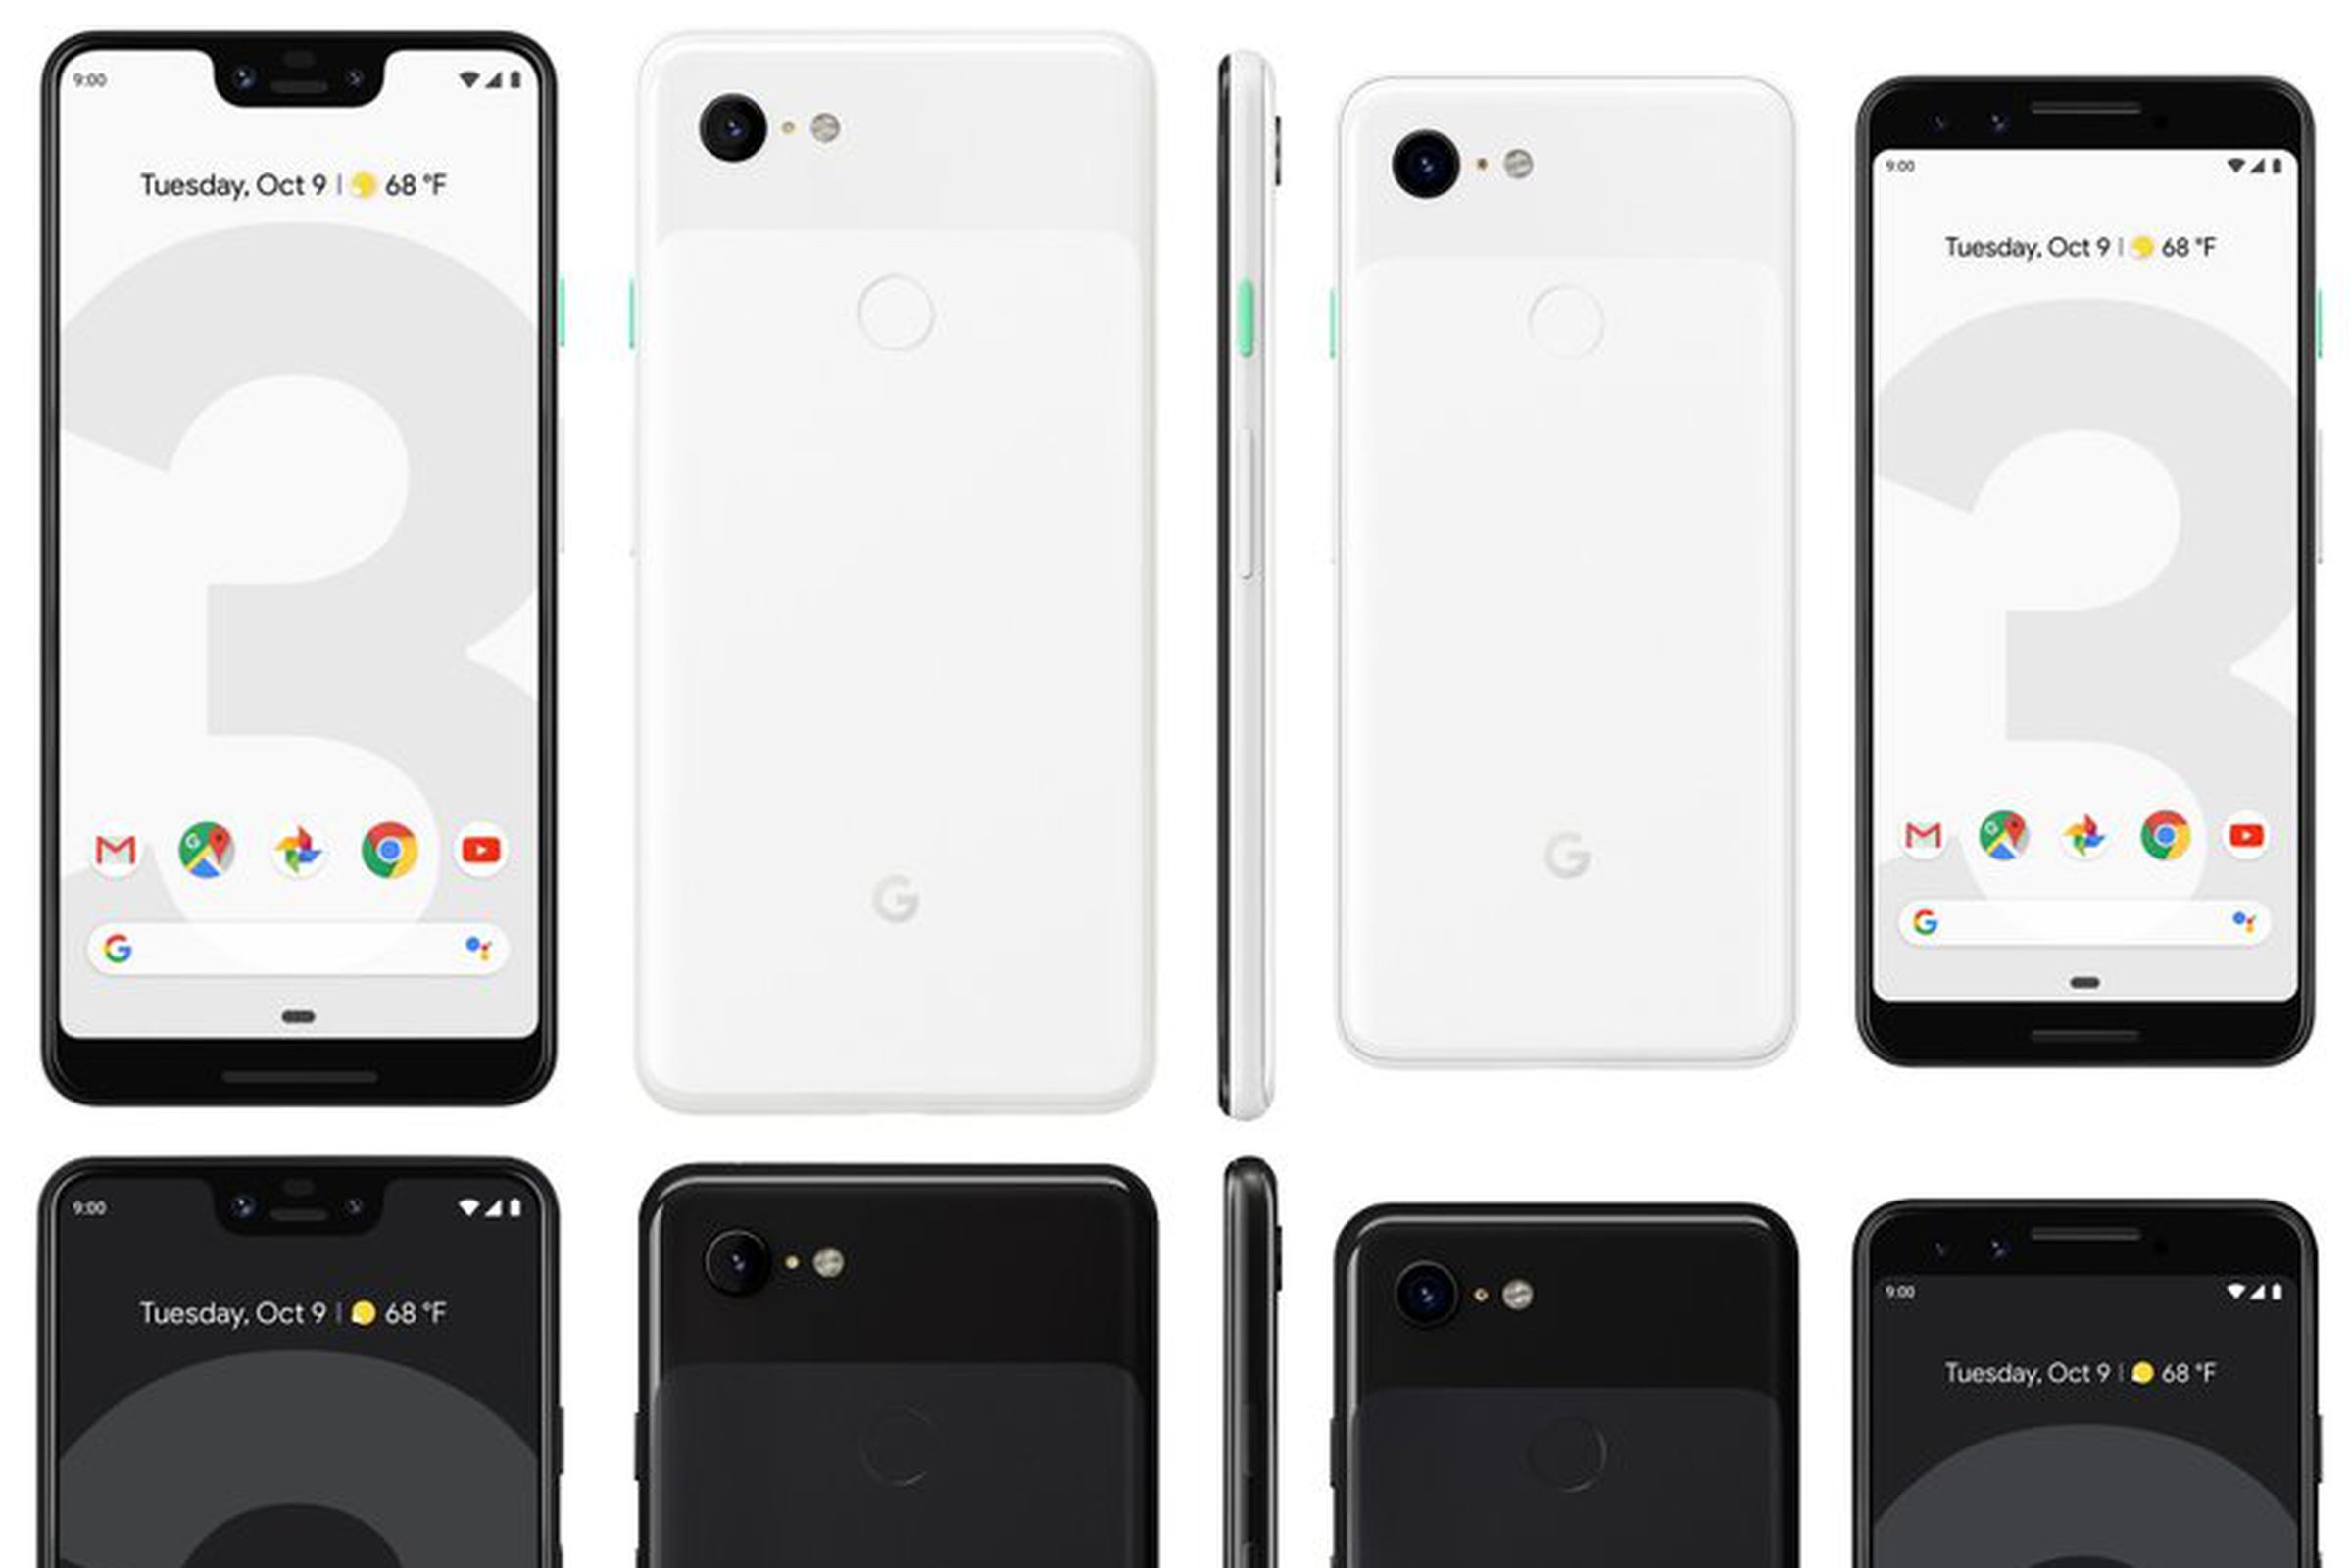 The latest leaked images of the Pixel 3.